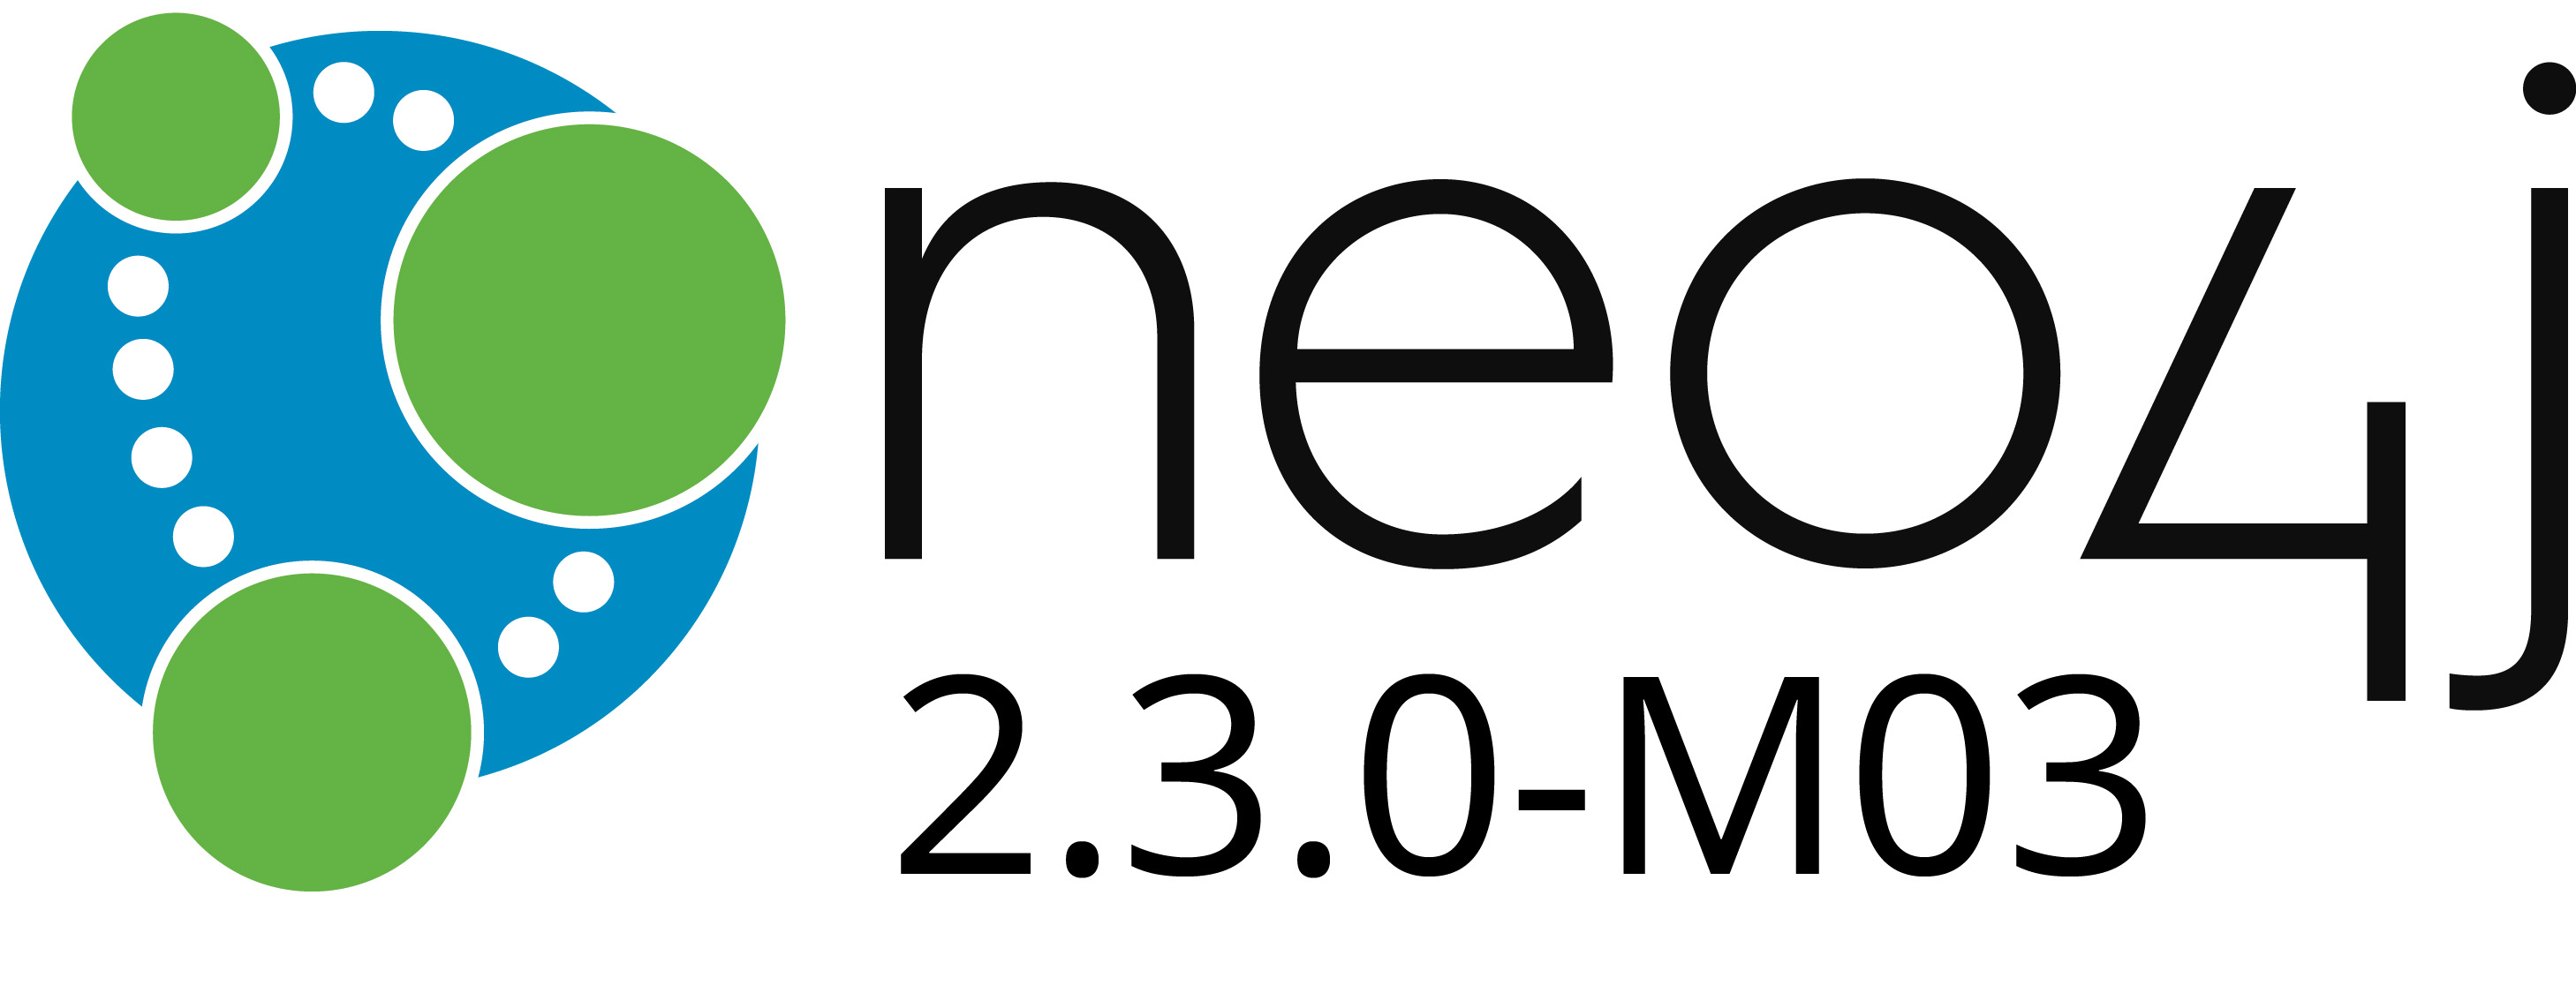 Discover the New Features in the Latest Milestone Release of Neo4j 2.3 in the Beta Program